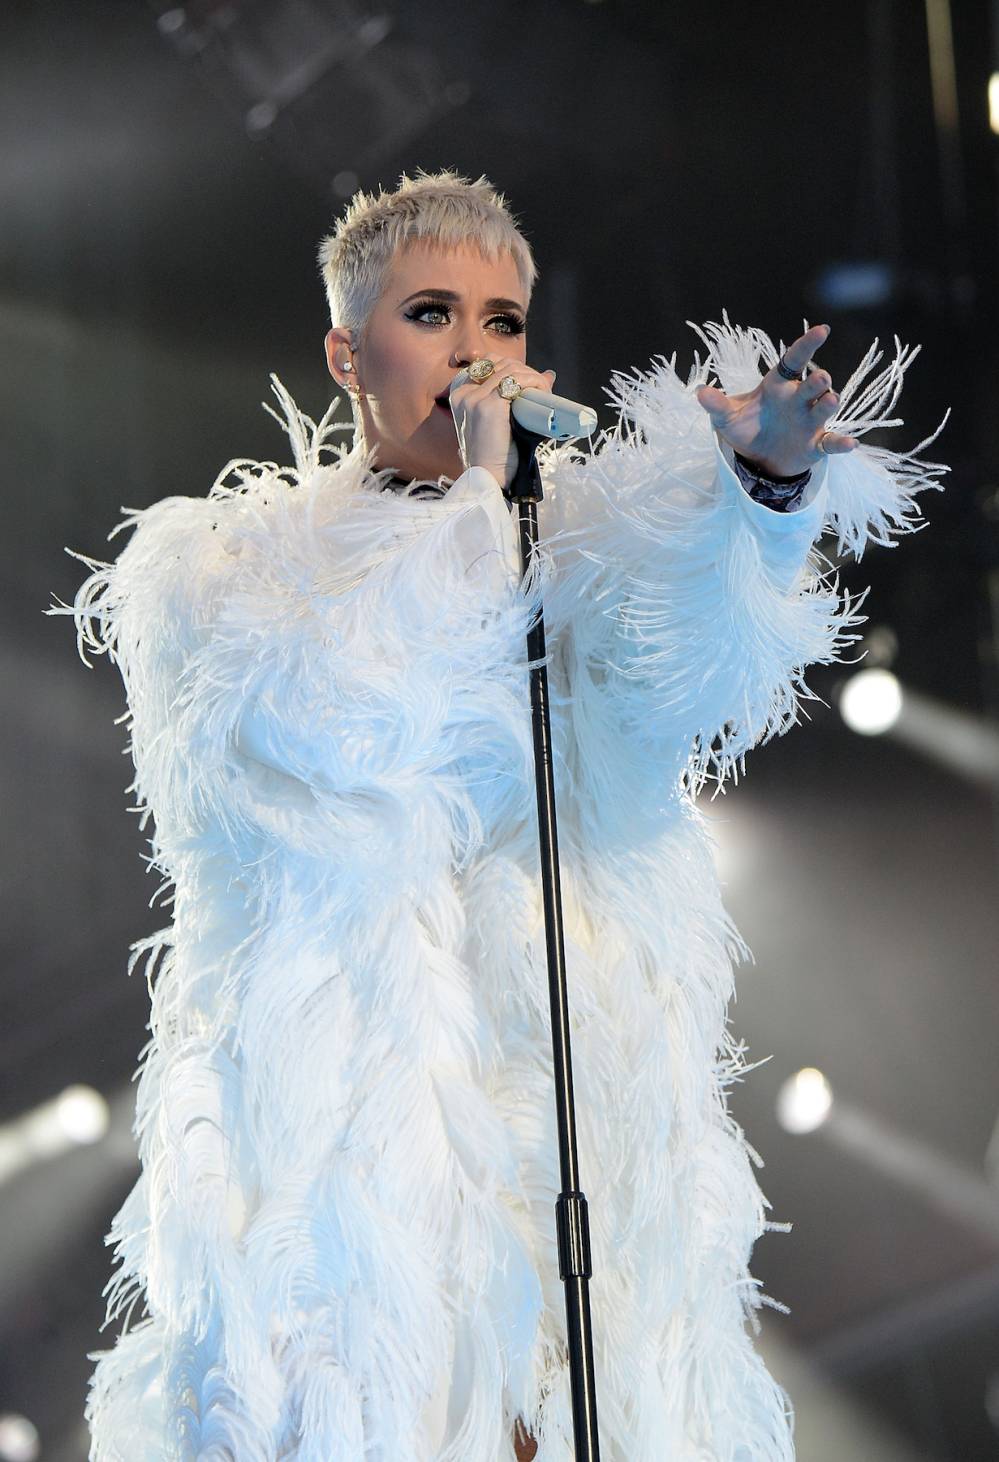 Katy Perry Sings Powerful Version of ‘Part of Me’ in Manchester